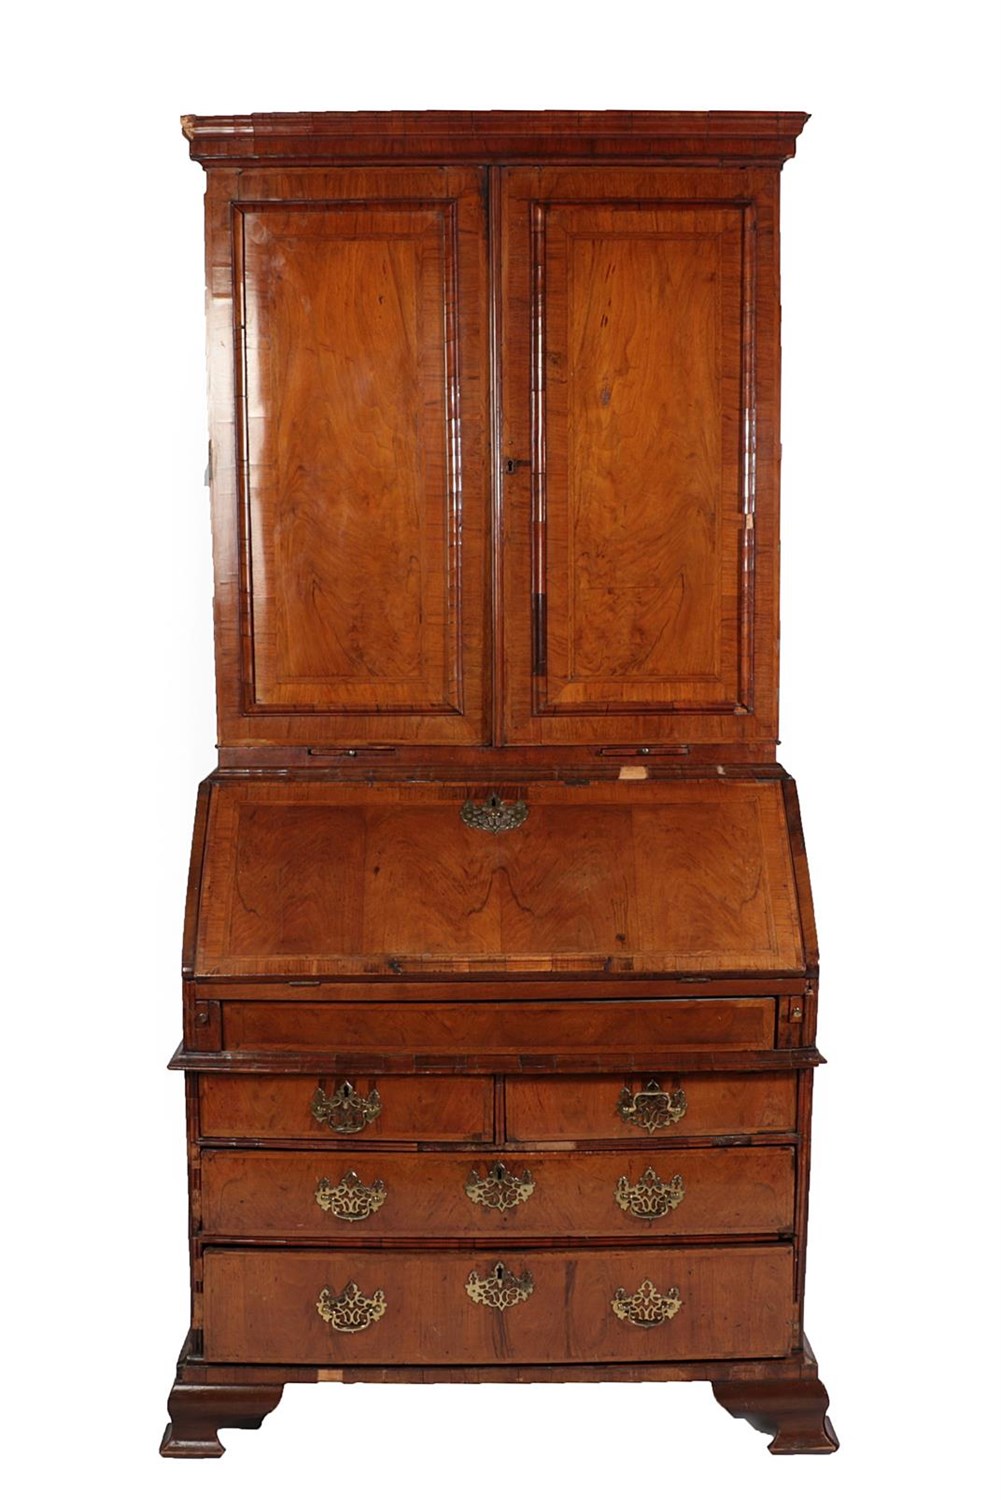 Lot 548 - An Early 18th Century Walnut Bureau Bookcase, the upper section with moulded panel doors...